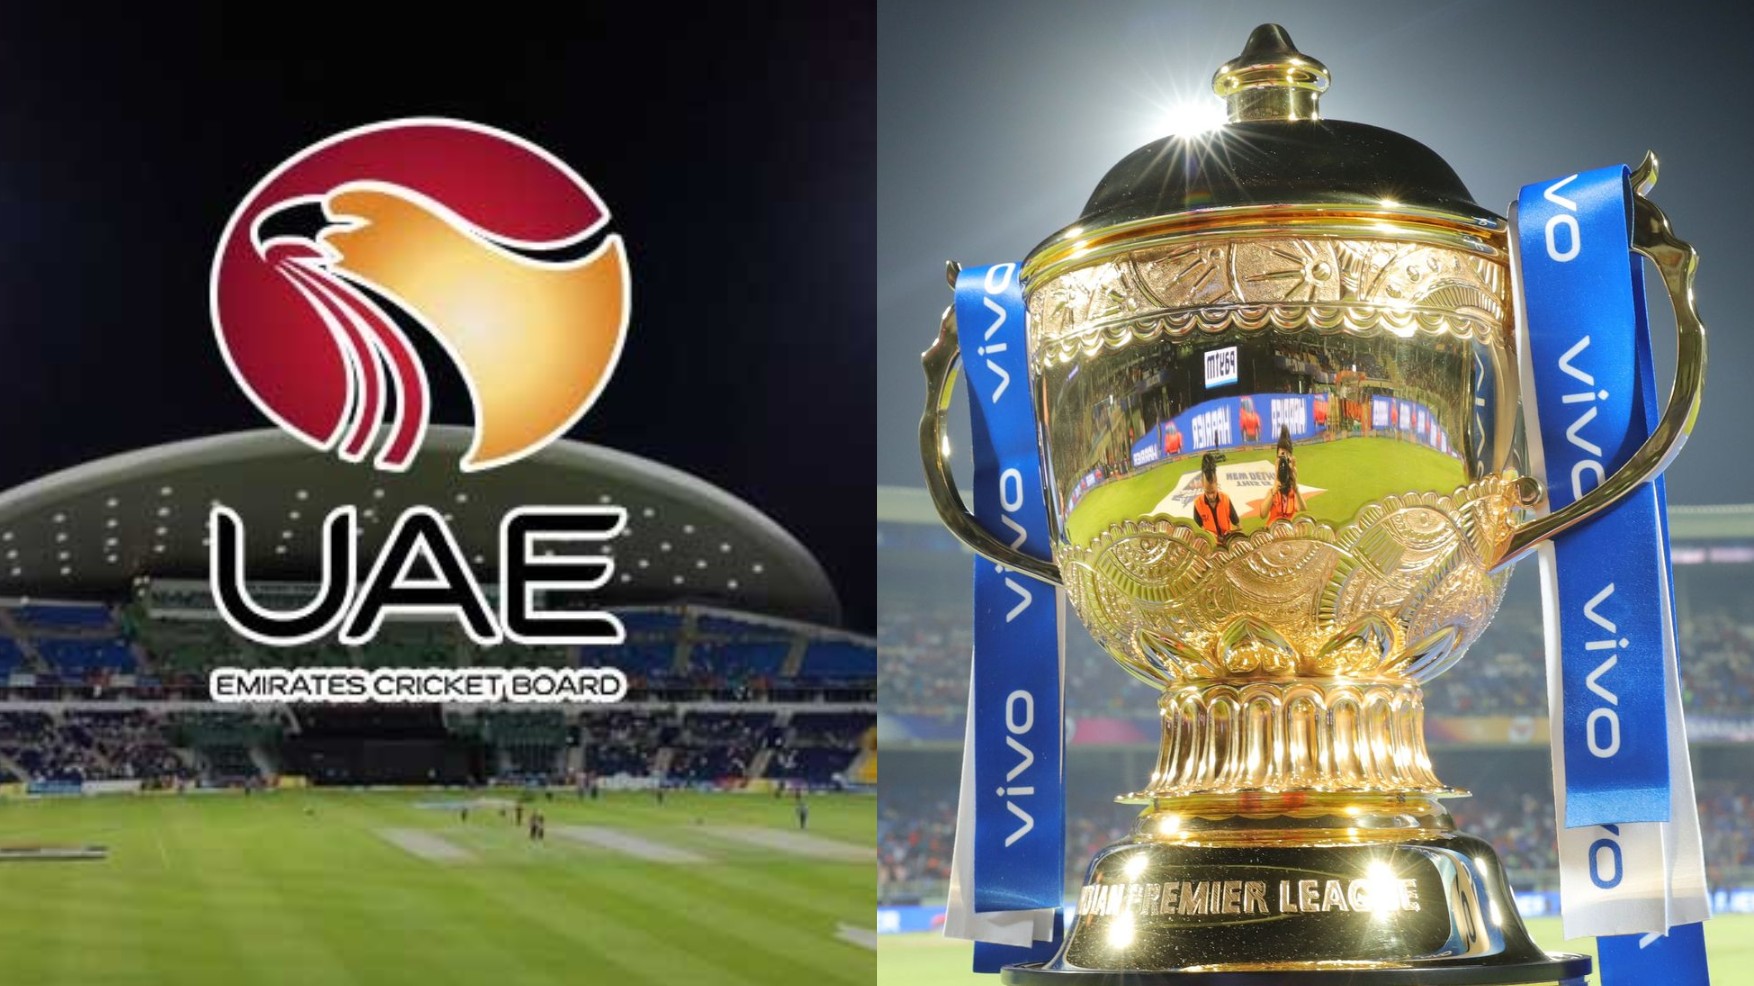 IPL 2020: UAE cricket board waiting for official word from BCCI on hosting IPL 13